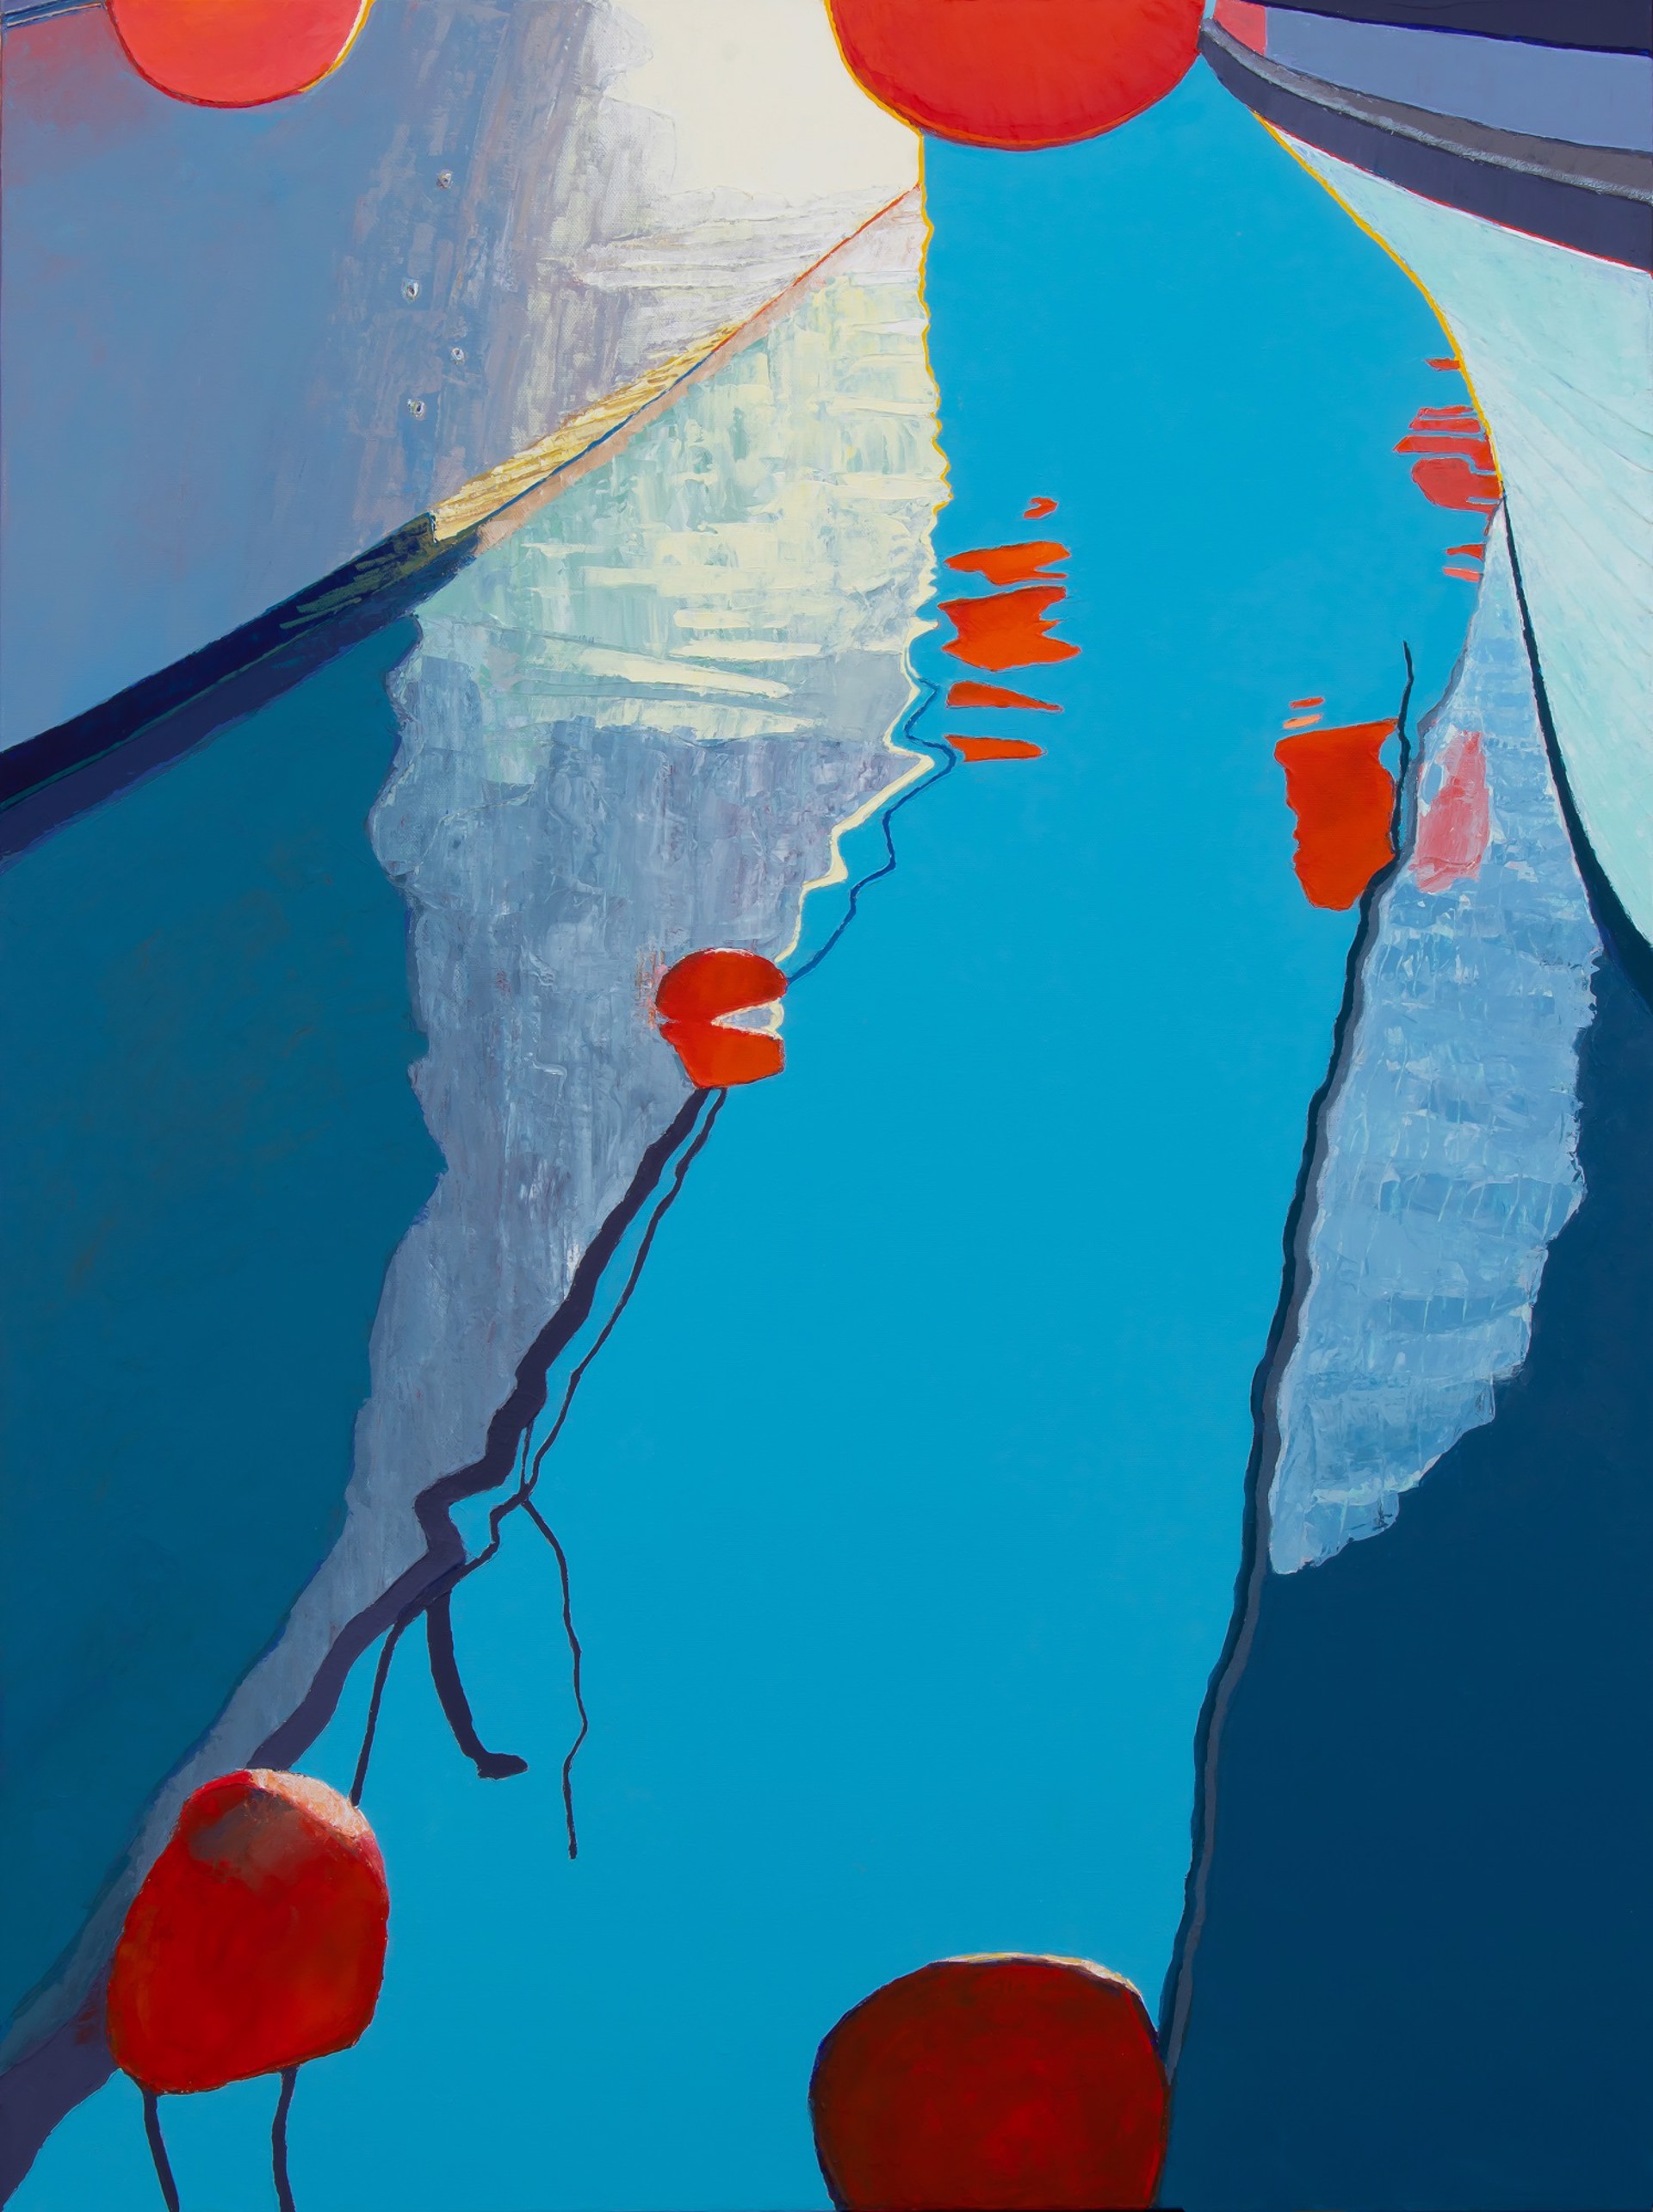 Boat Buoys' Reflections by Timothy Mulligan